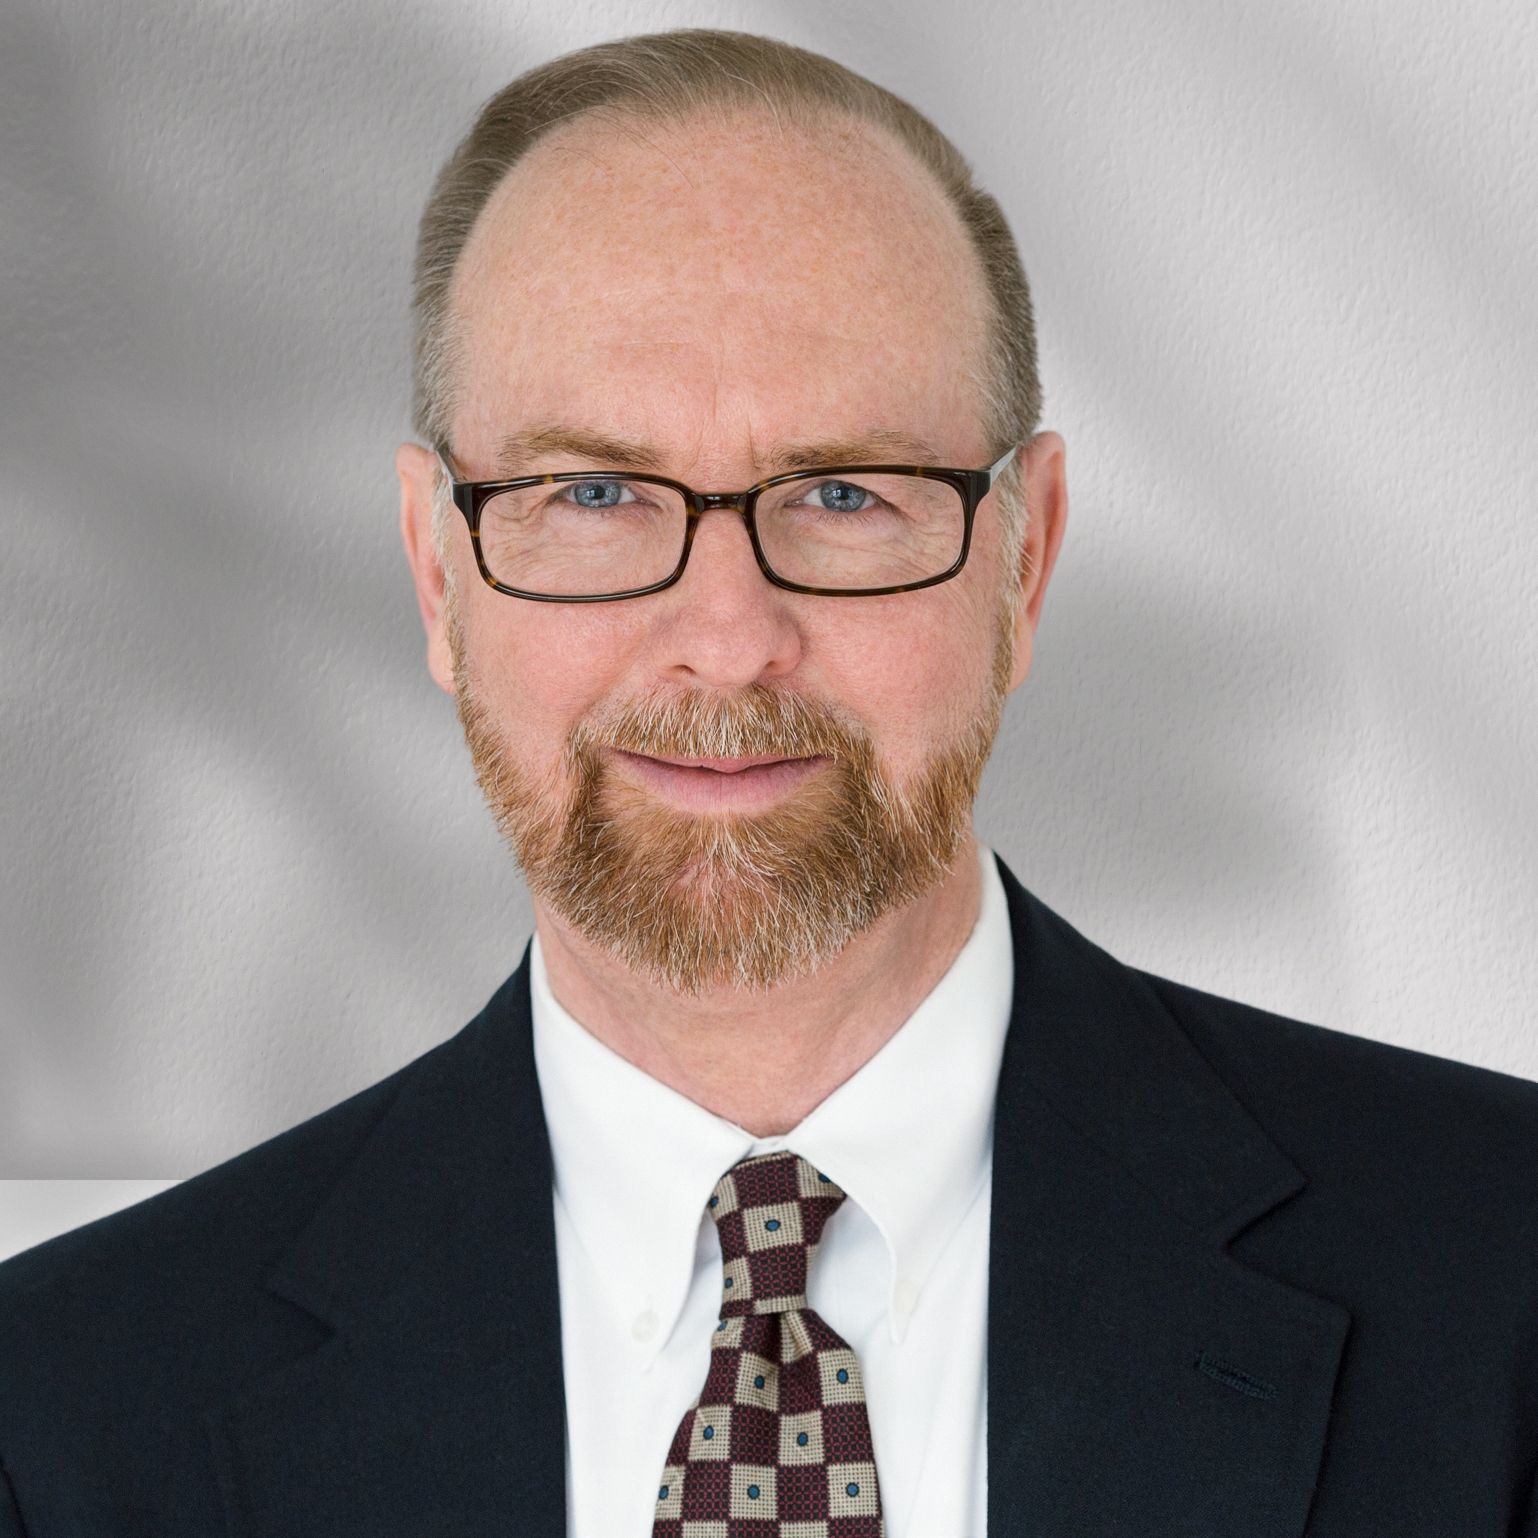 T. Neil Peters, P.E., is Senior Vice President at ARM Group LLC.  He is located in the Columbia, MD office.